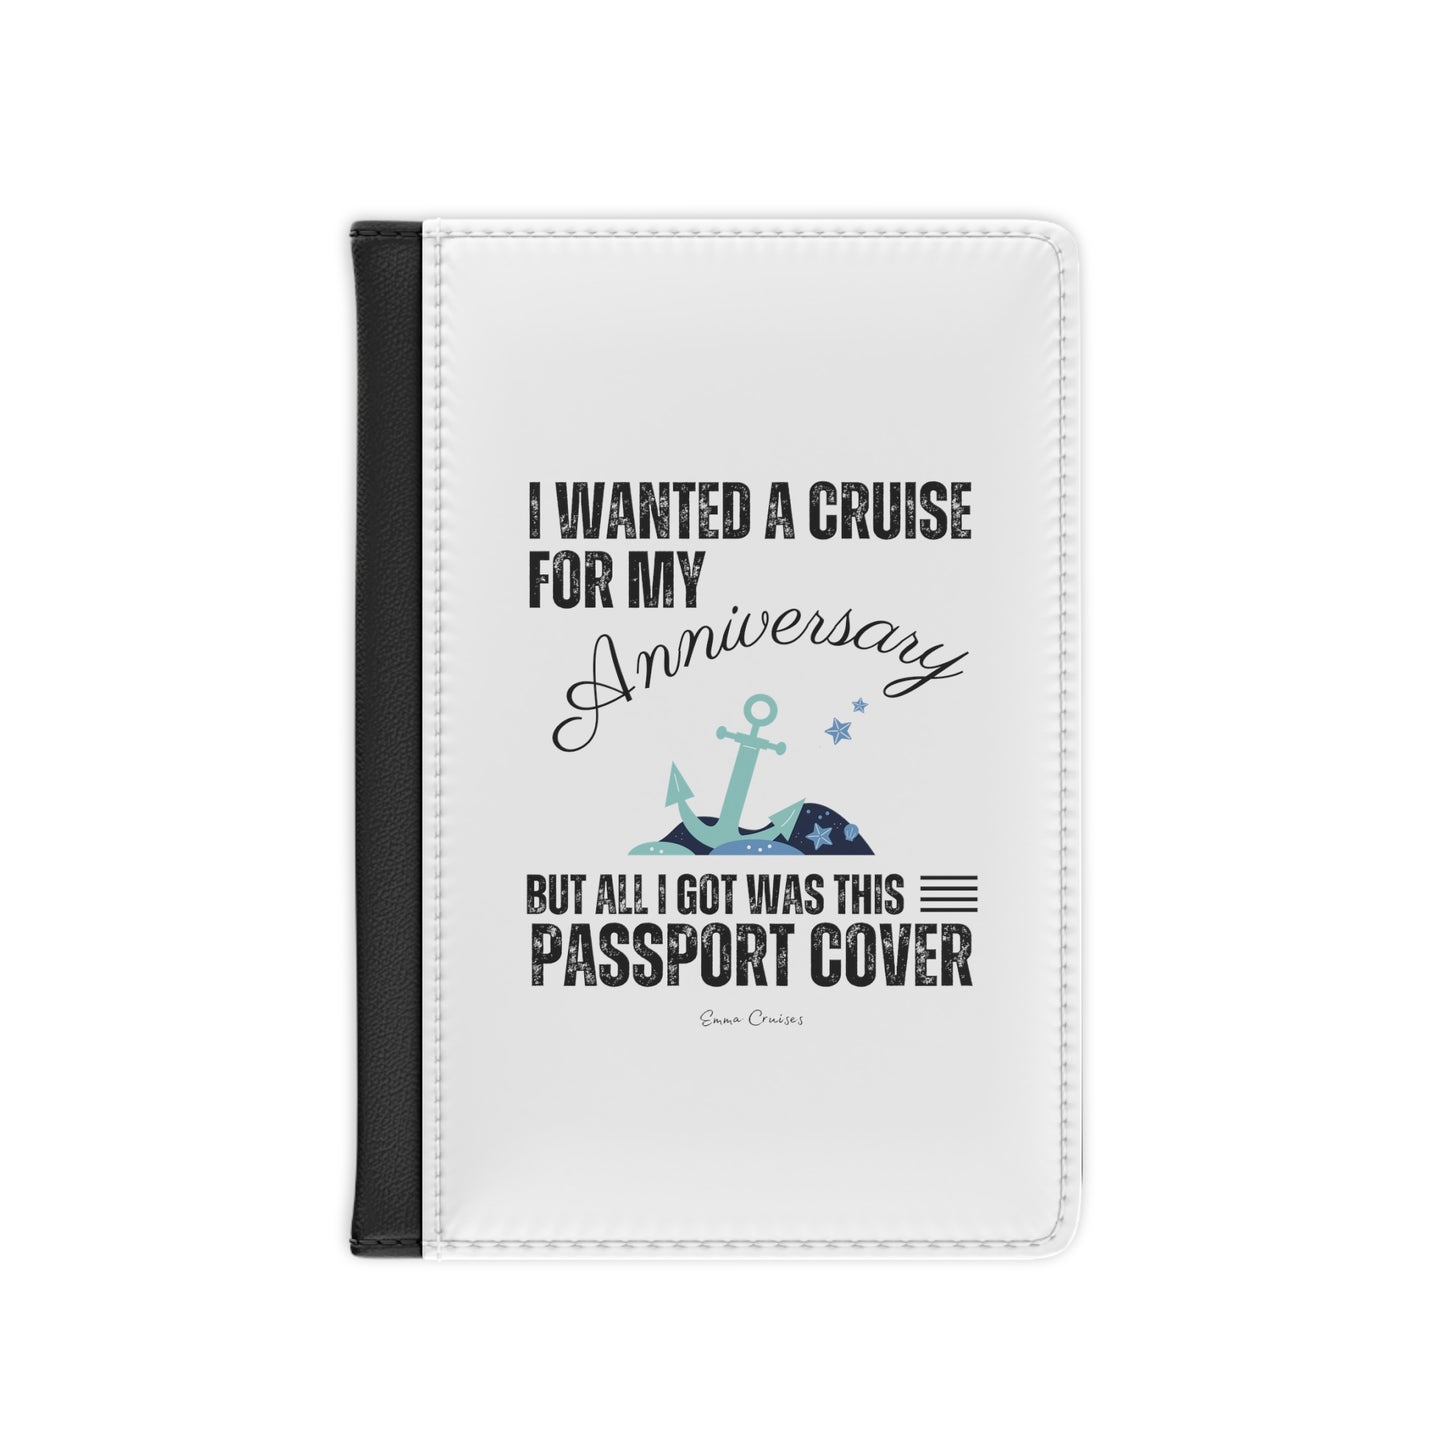 I Wanted a Cruise for My Anniversary - Passport Cover